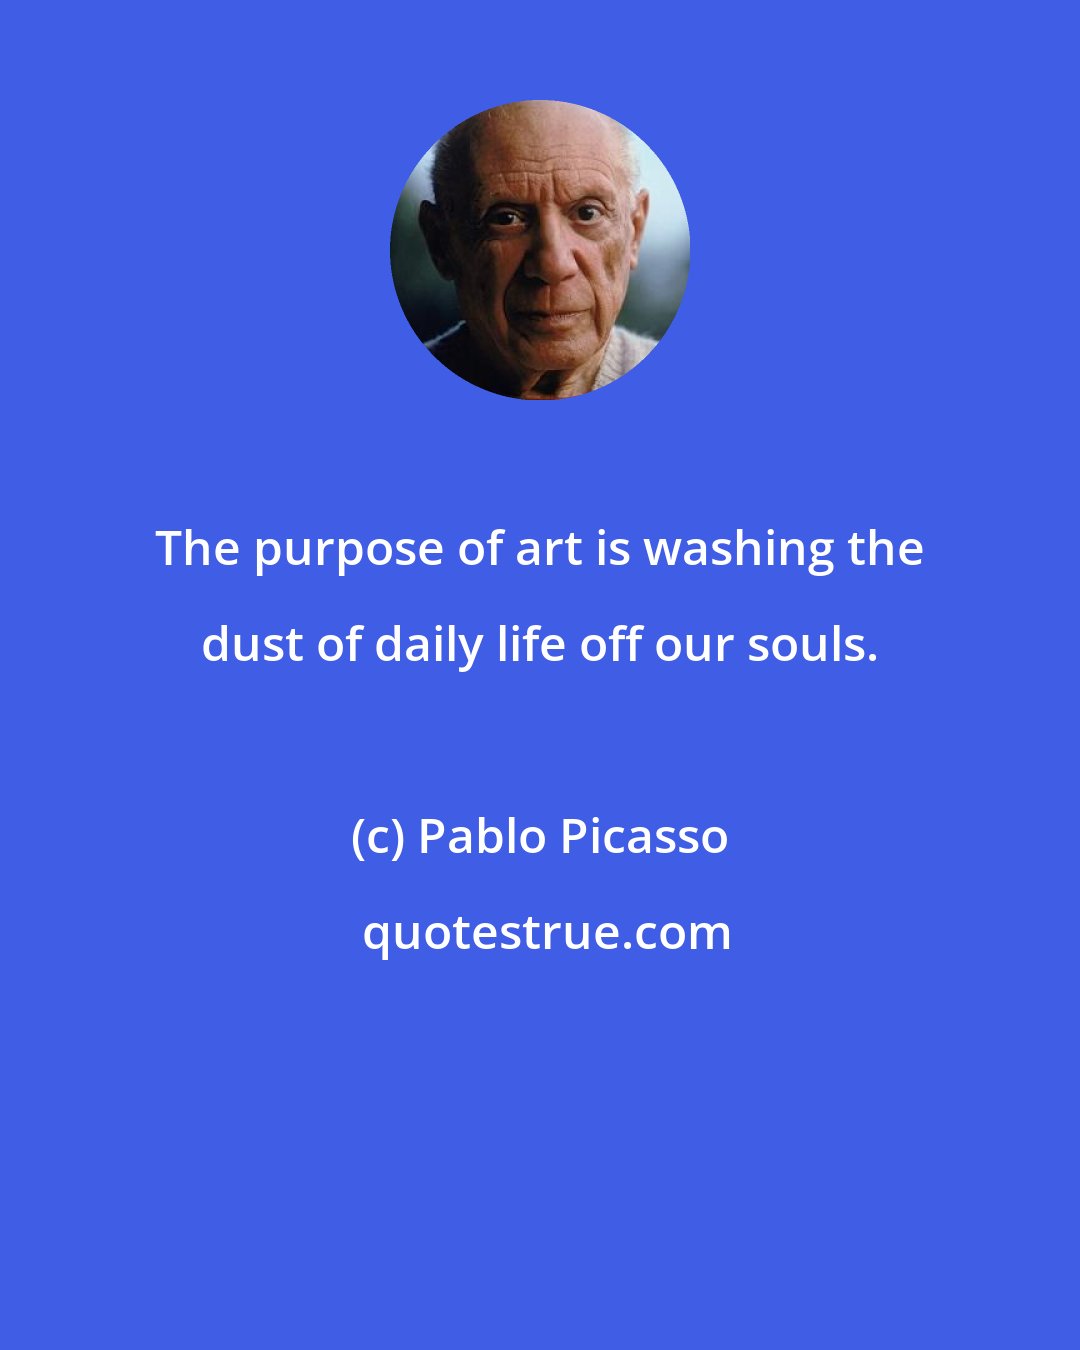 Pablo Picasso: The purpose of art is washing the dust of daily life off our souls.